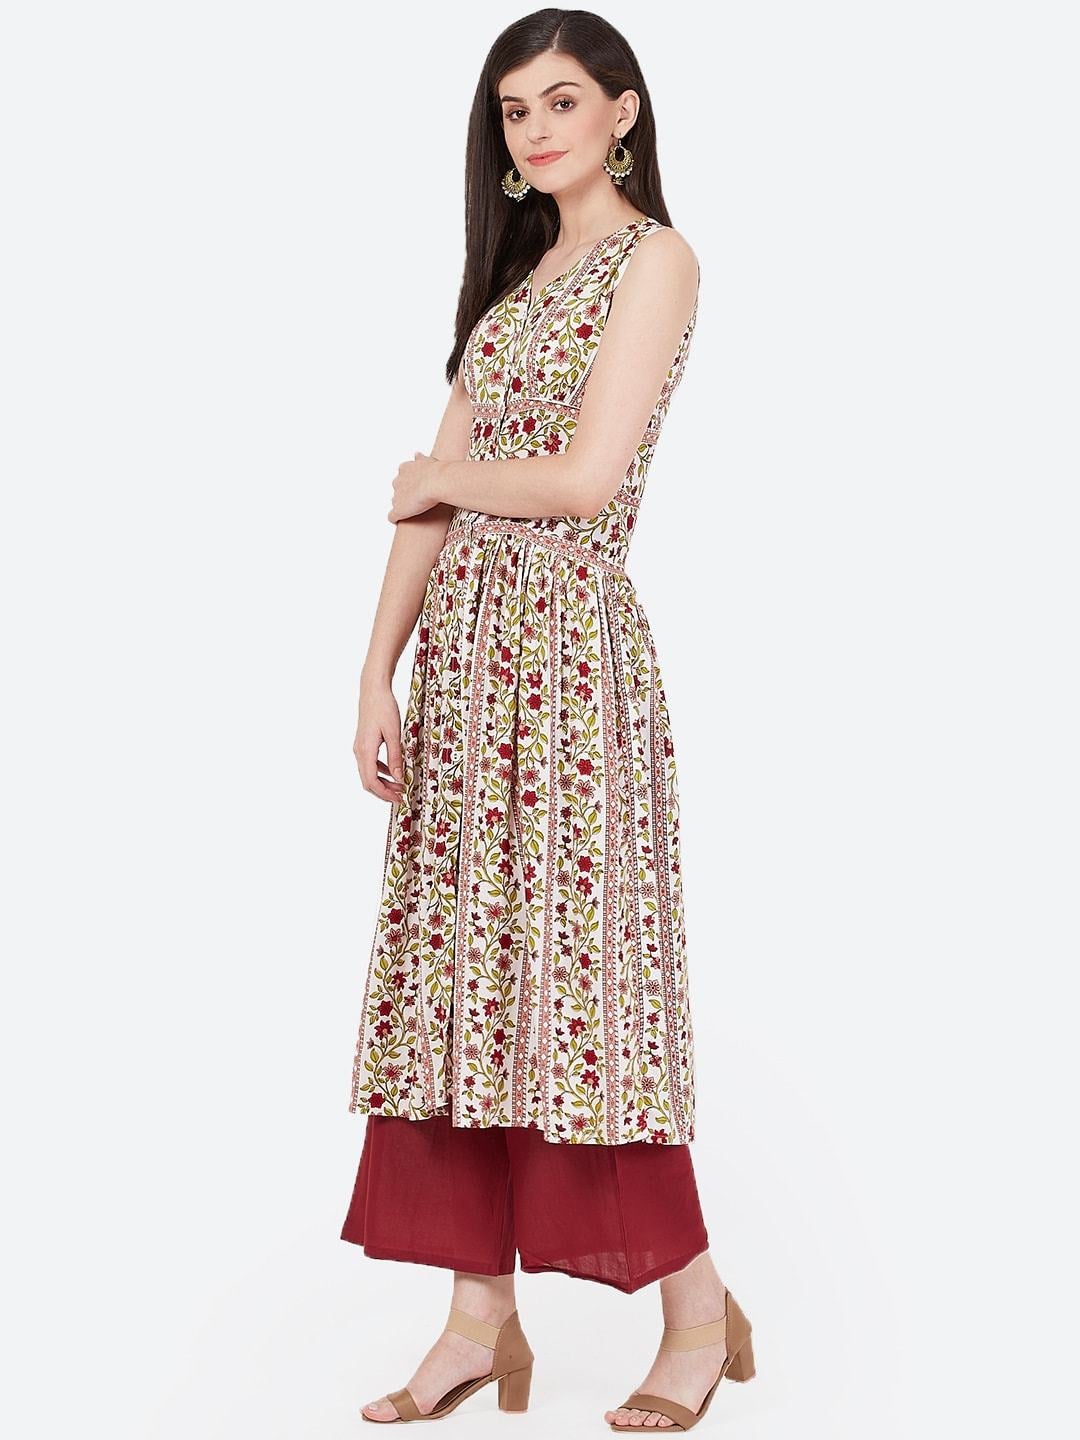 Women's Off-White & Red Printed A-Line Kurta with Gathers - Meeranshi